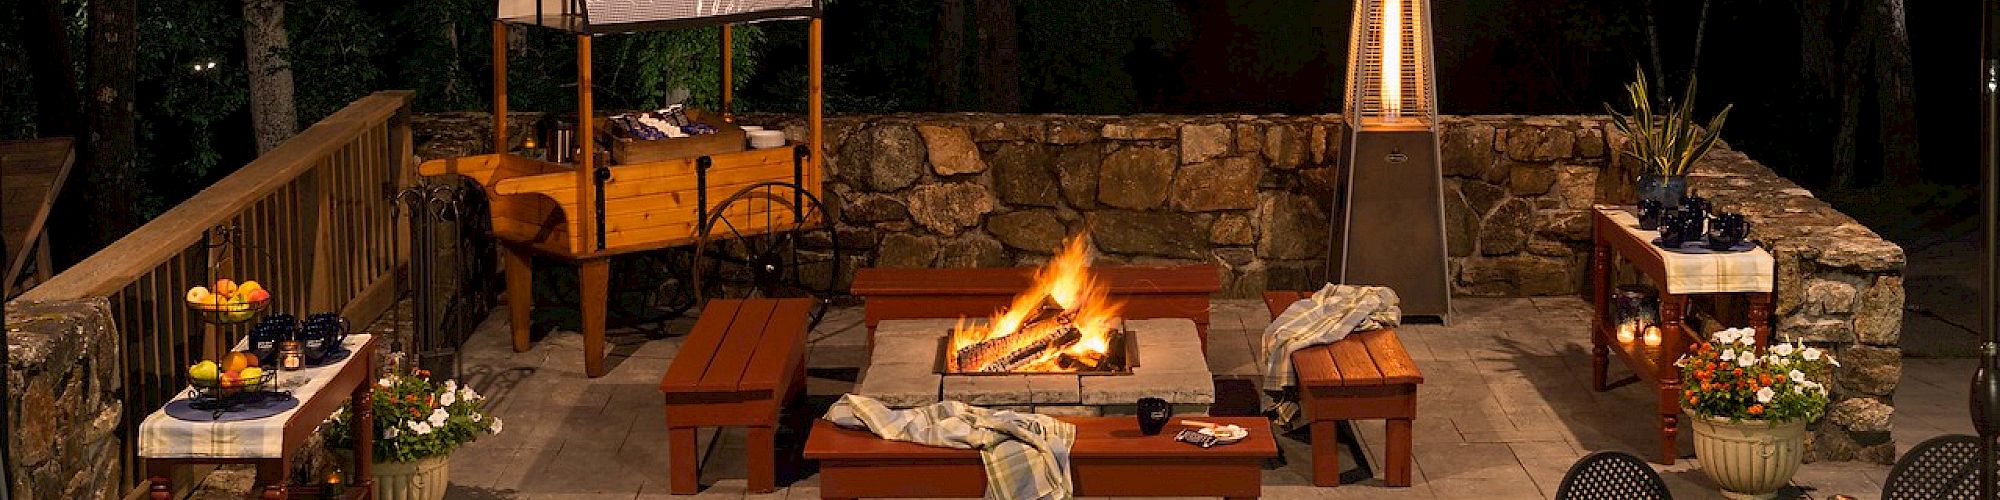 Outdoor patio with a fire pit, seating, and ambient lighting at night.